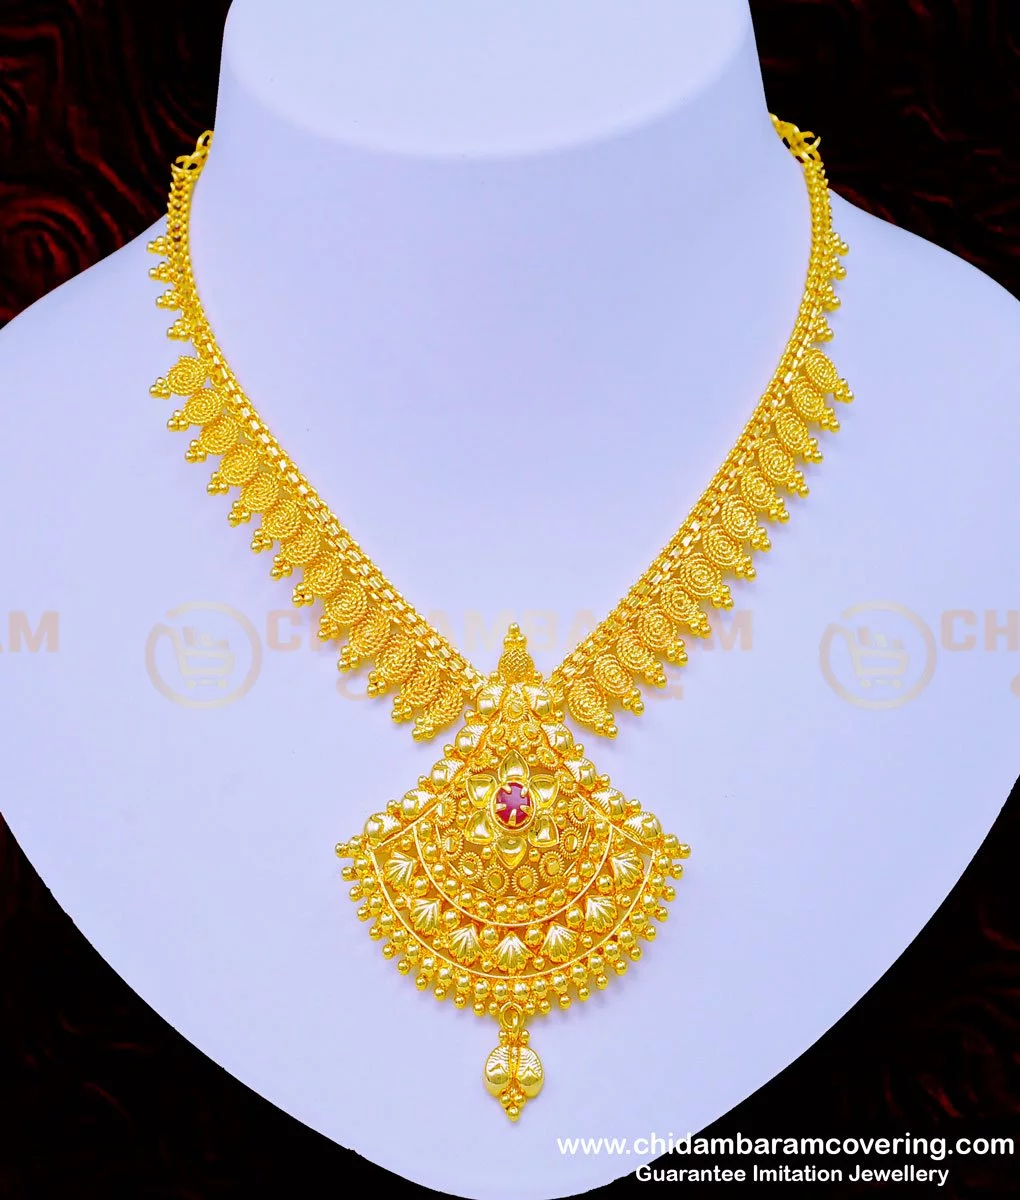 Buy Marriage Bridal Gold Necklace Design Ruby Stone Gold Covering ...